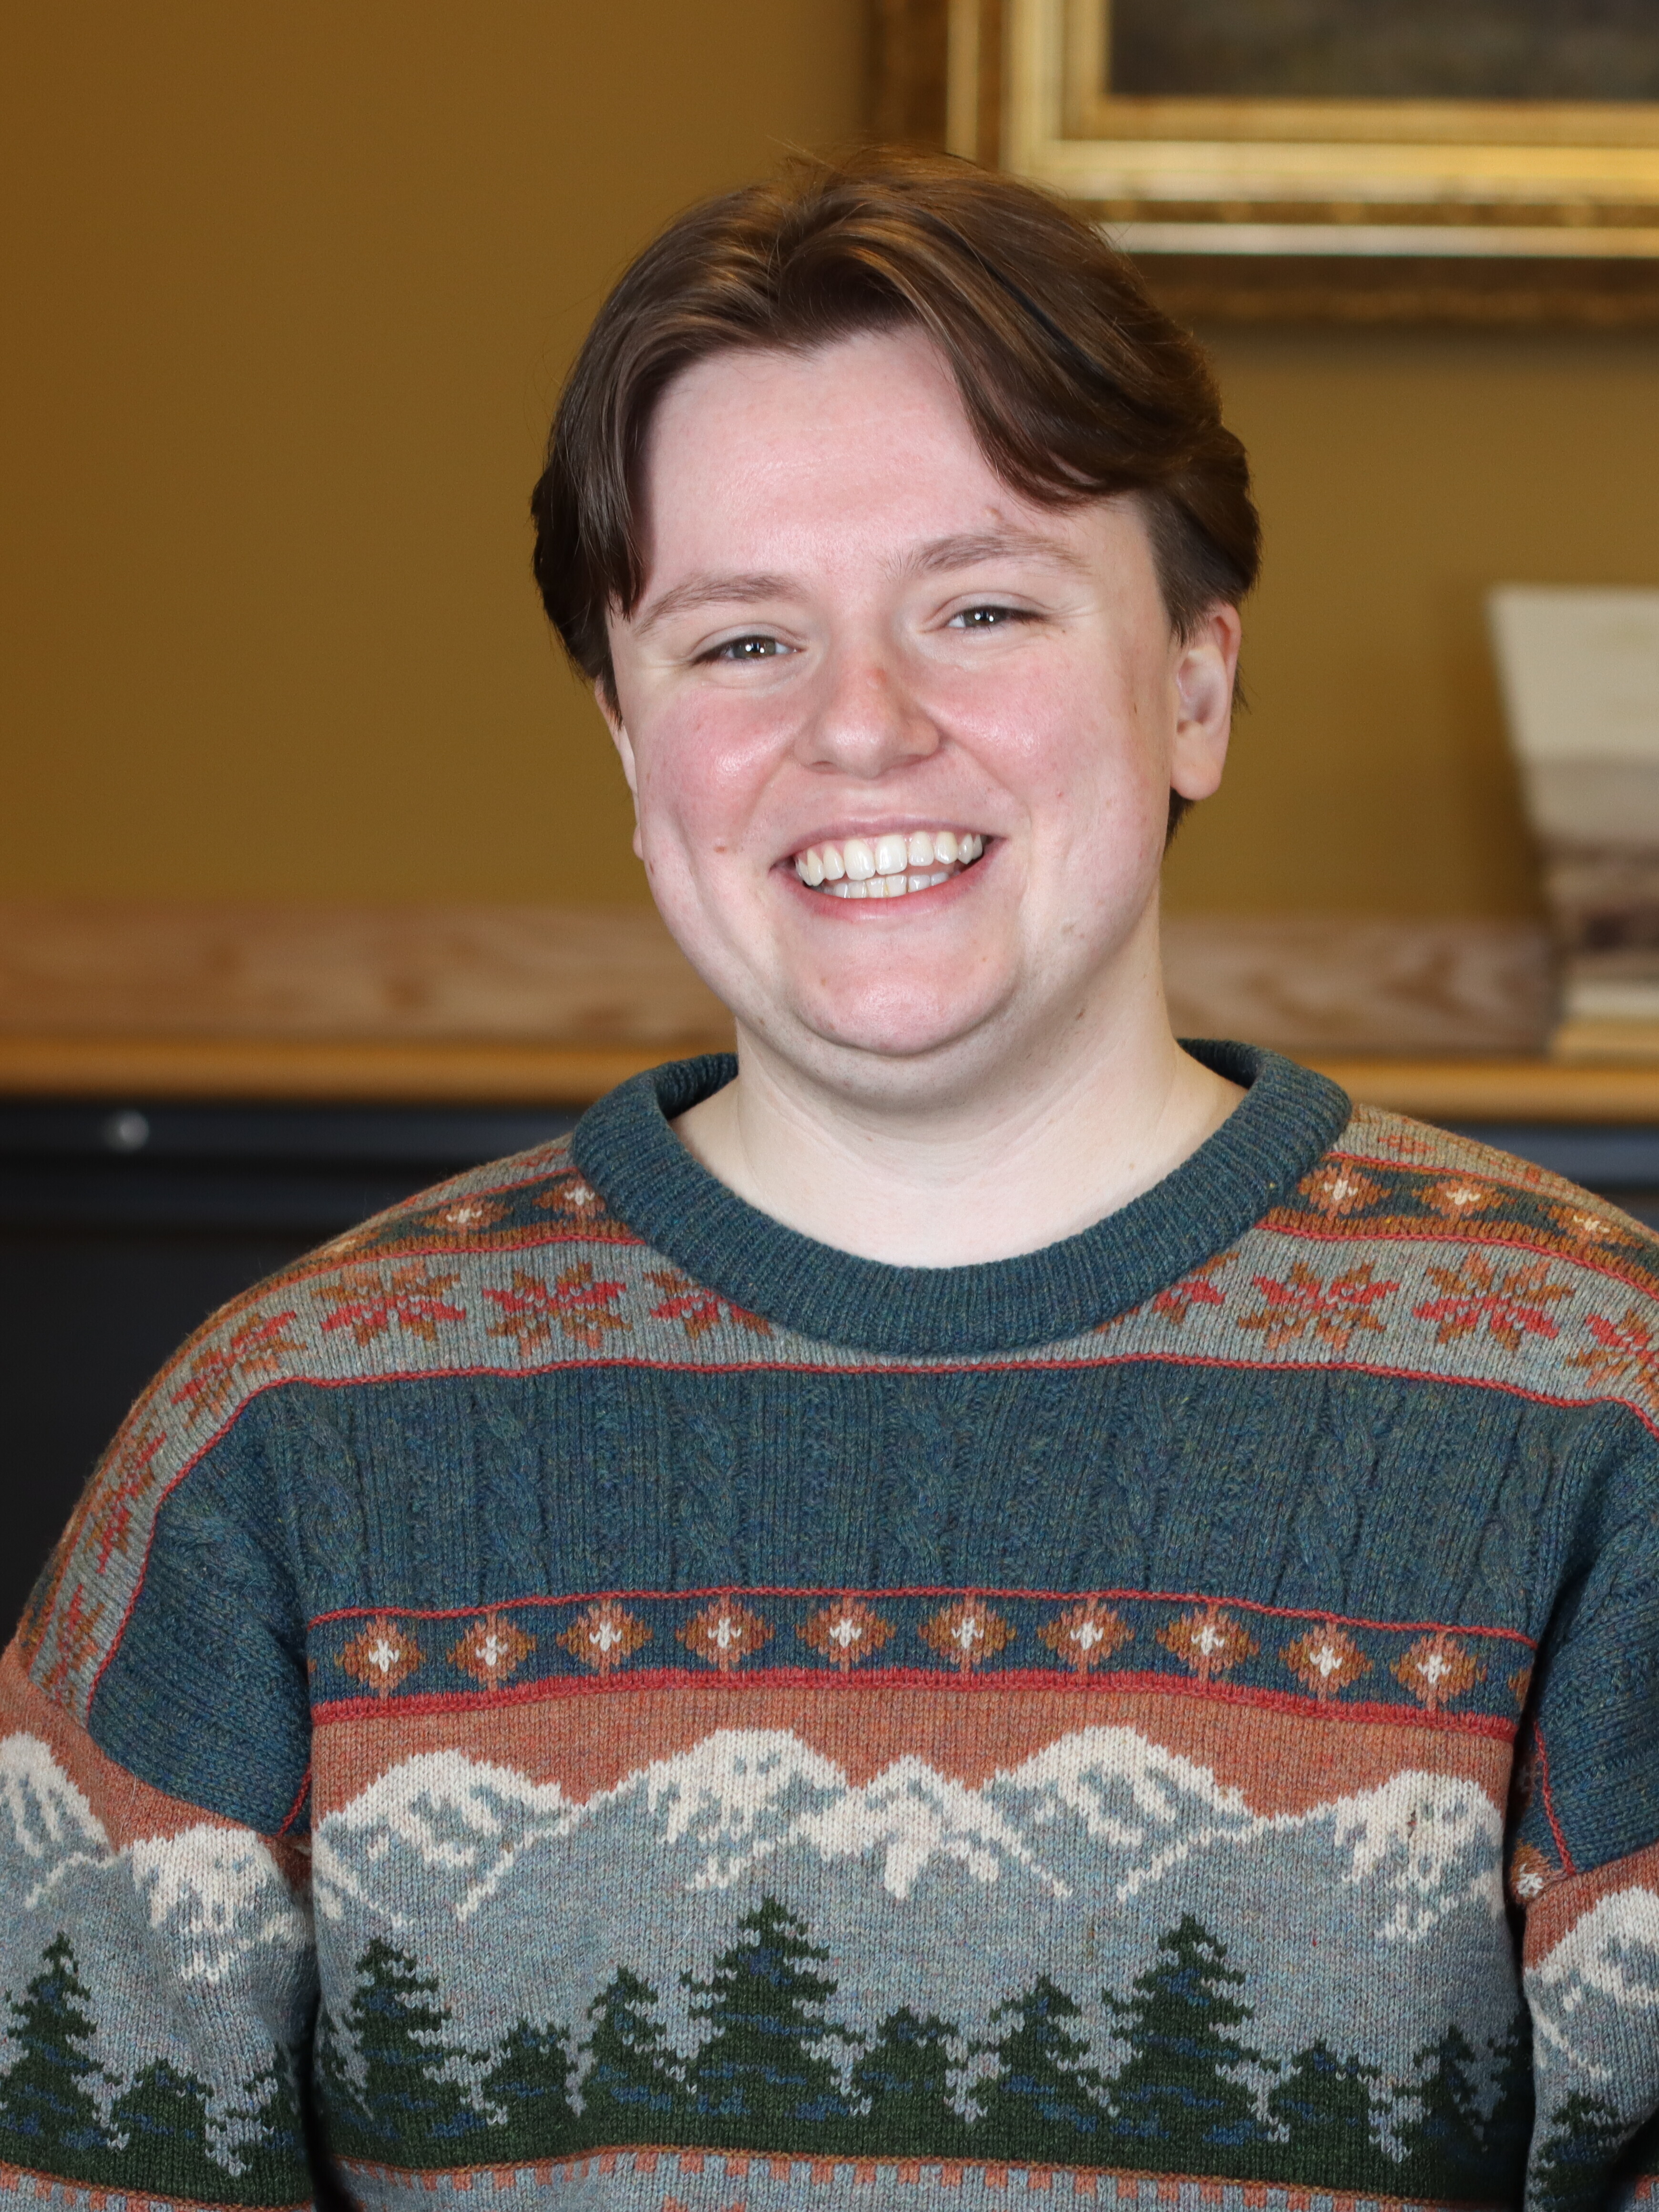 A person smiling at the camera. They're wearing a stripped sweater featuring mountains and trees.